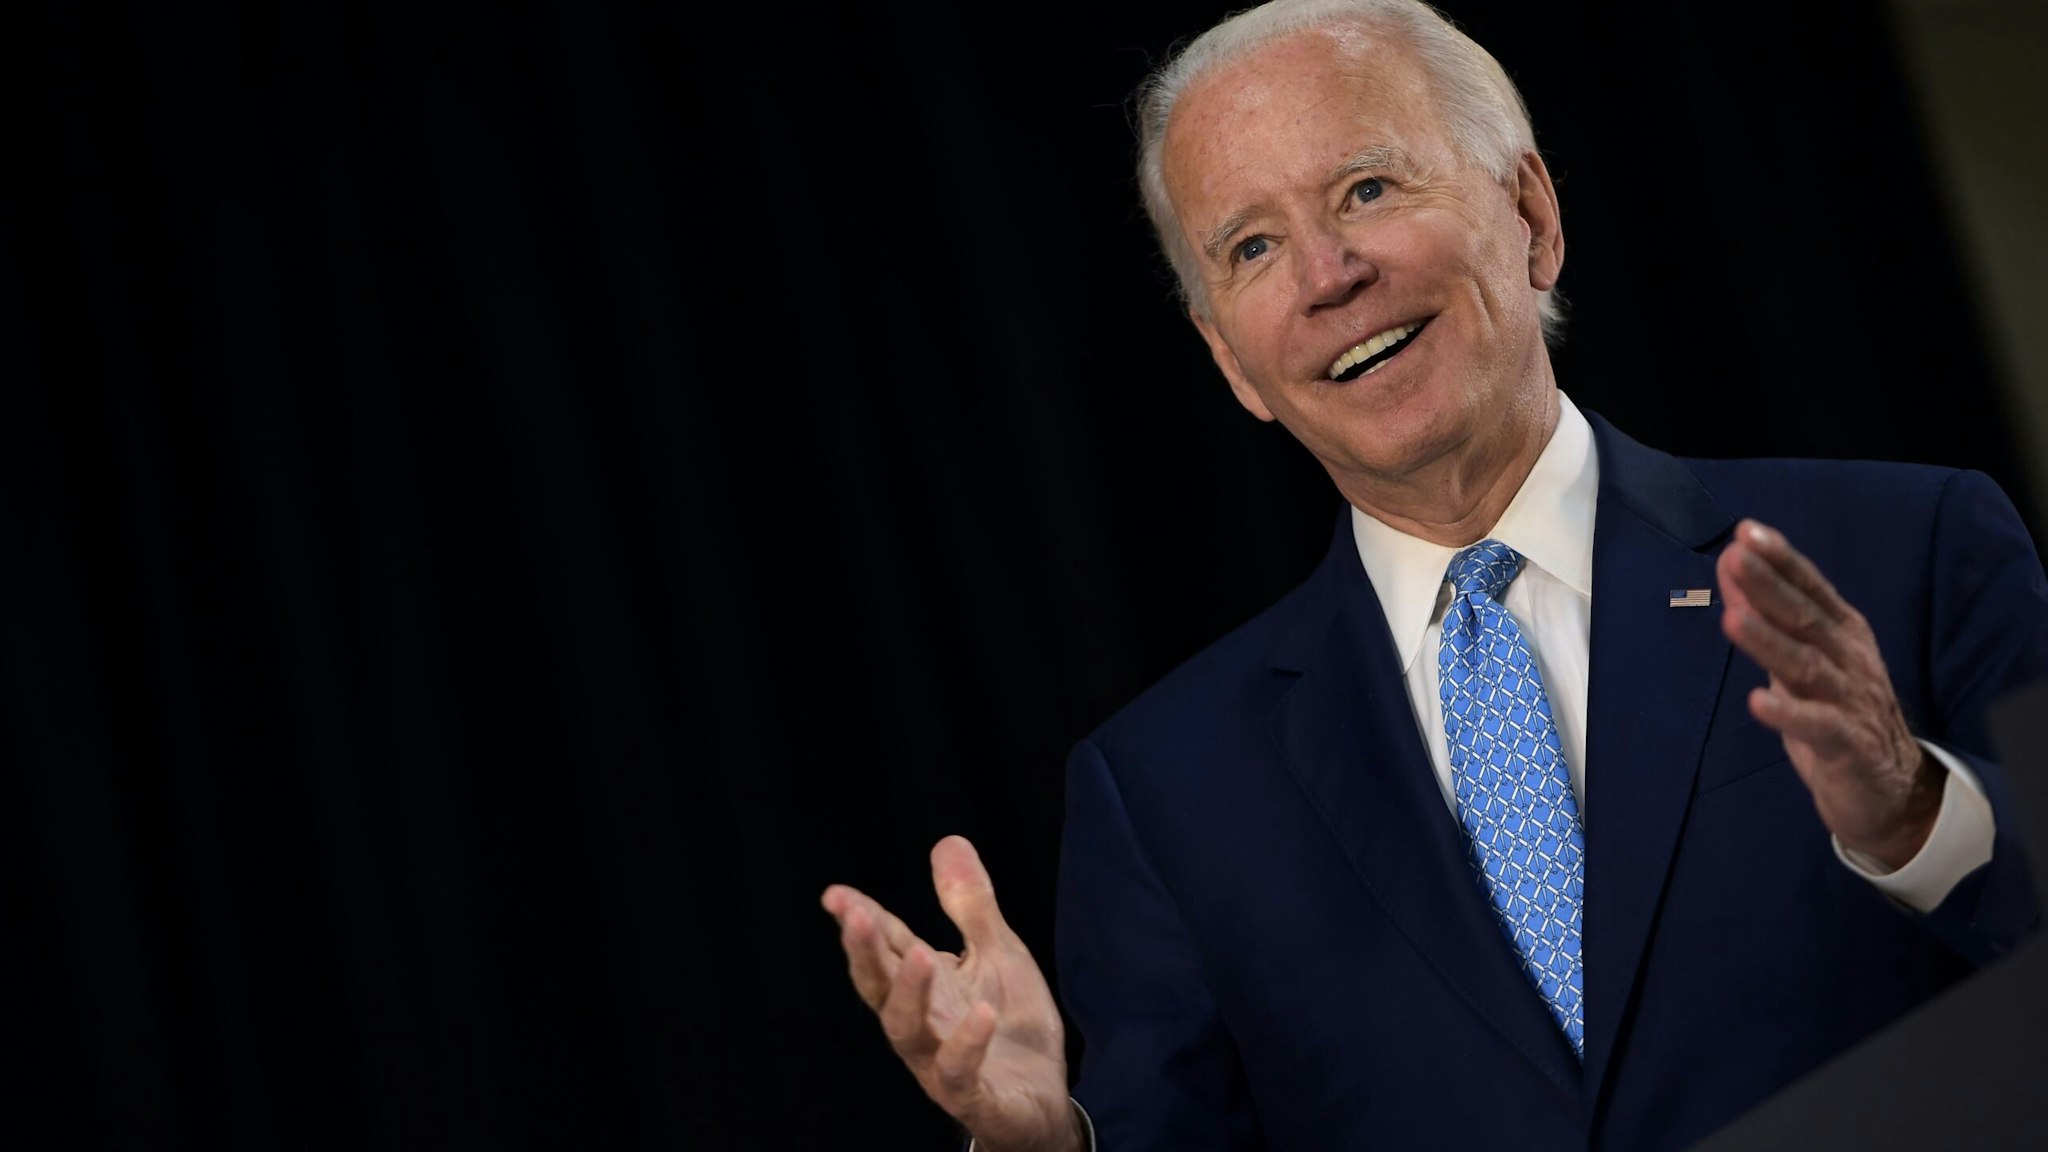 US Democratic presidential candidate Joe Biden answers questions after speaking about the coronavirus pandemic and the economy on June 30, 2020, in Wilmington, Delaware. (Photo by Brendan Smialowski / AFP) (Photo by BRENDAN SMIALOWSKI/AFP via Getty Images)